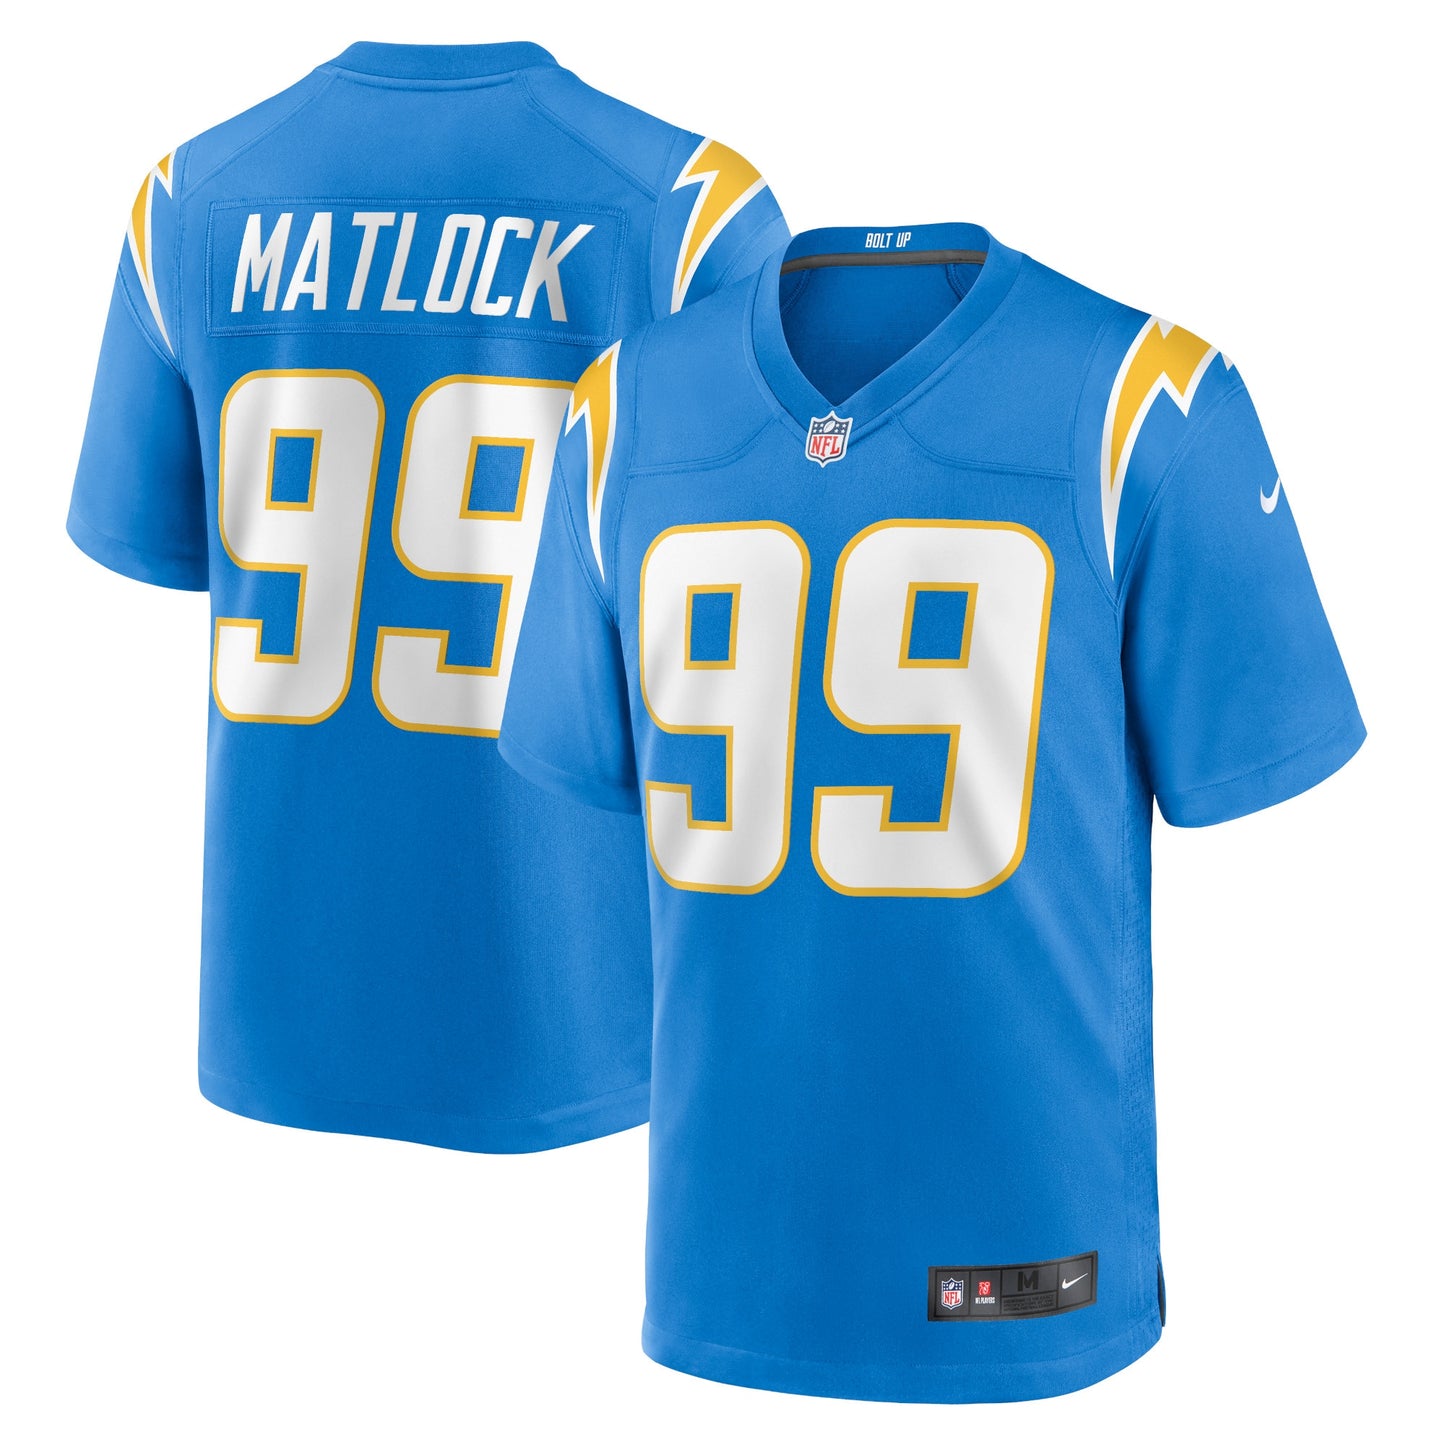 Scott Matlock Los Angeles Chargers Nike Team Game Jersey - Powder Blue